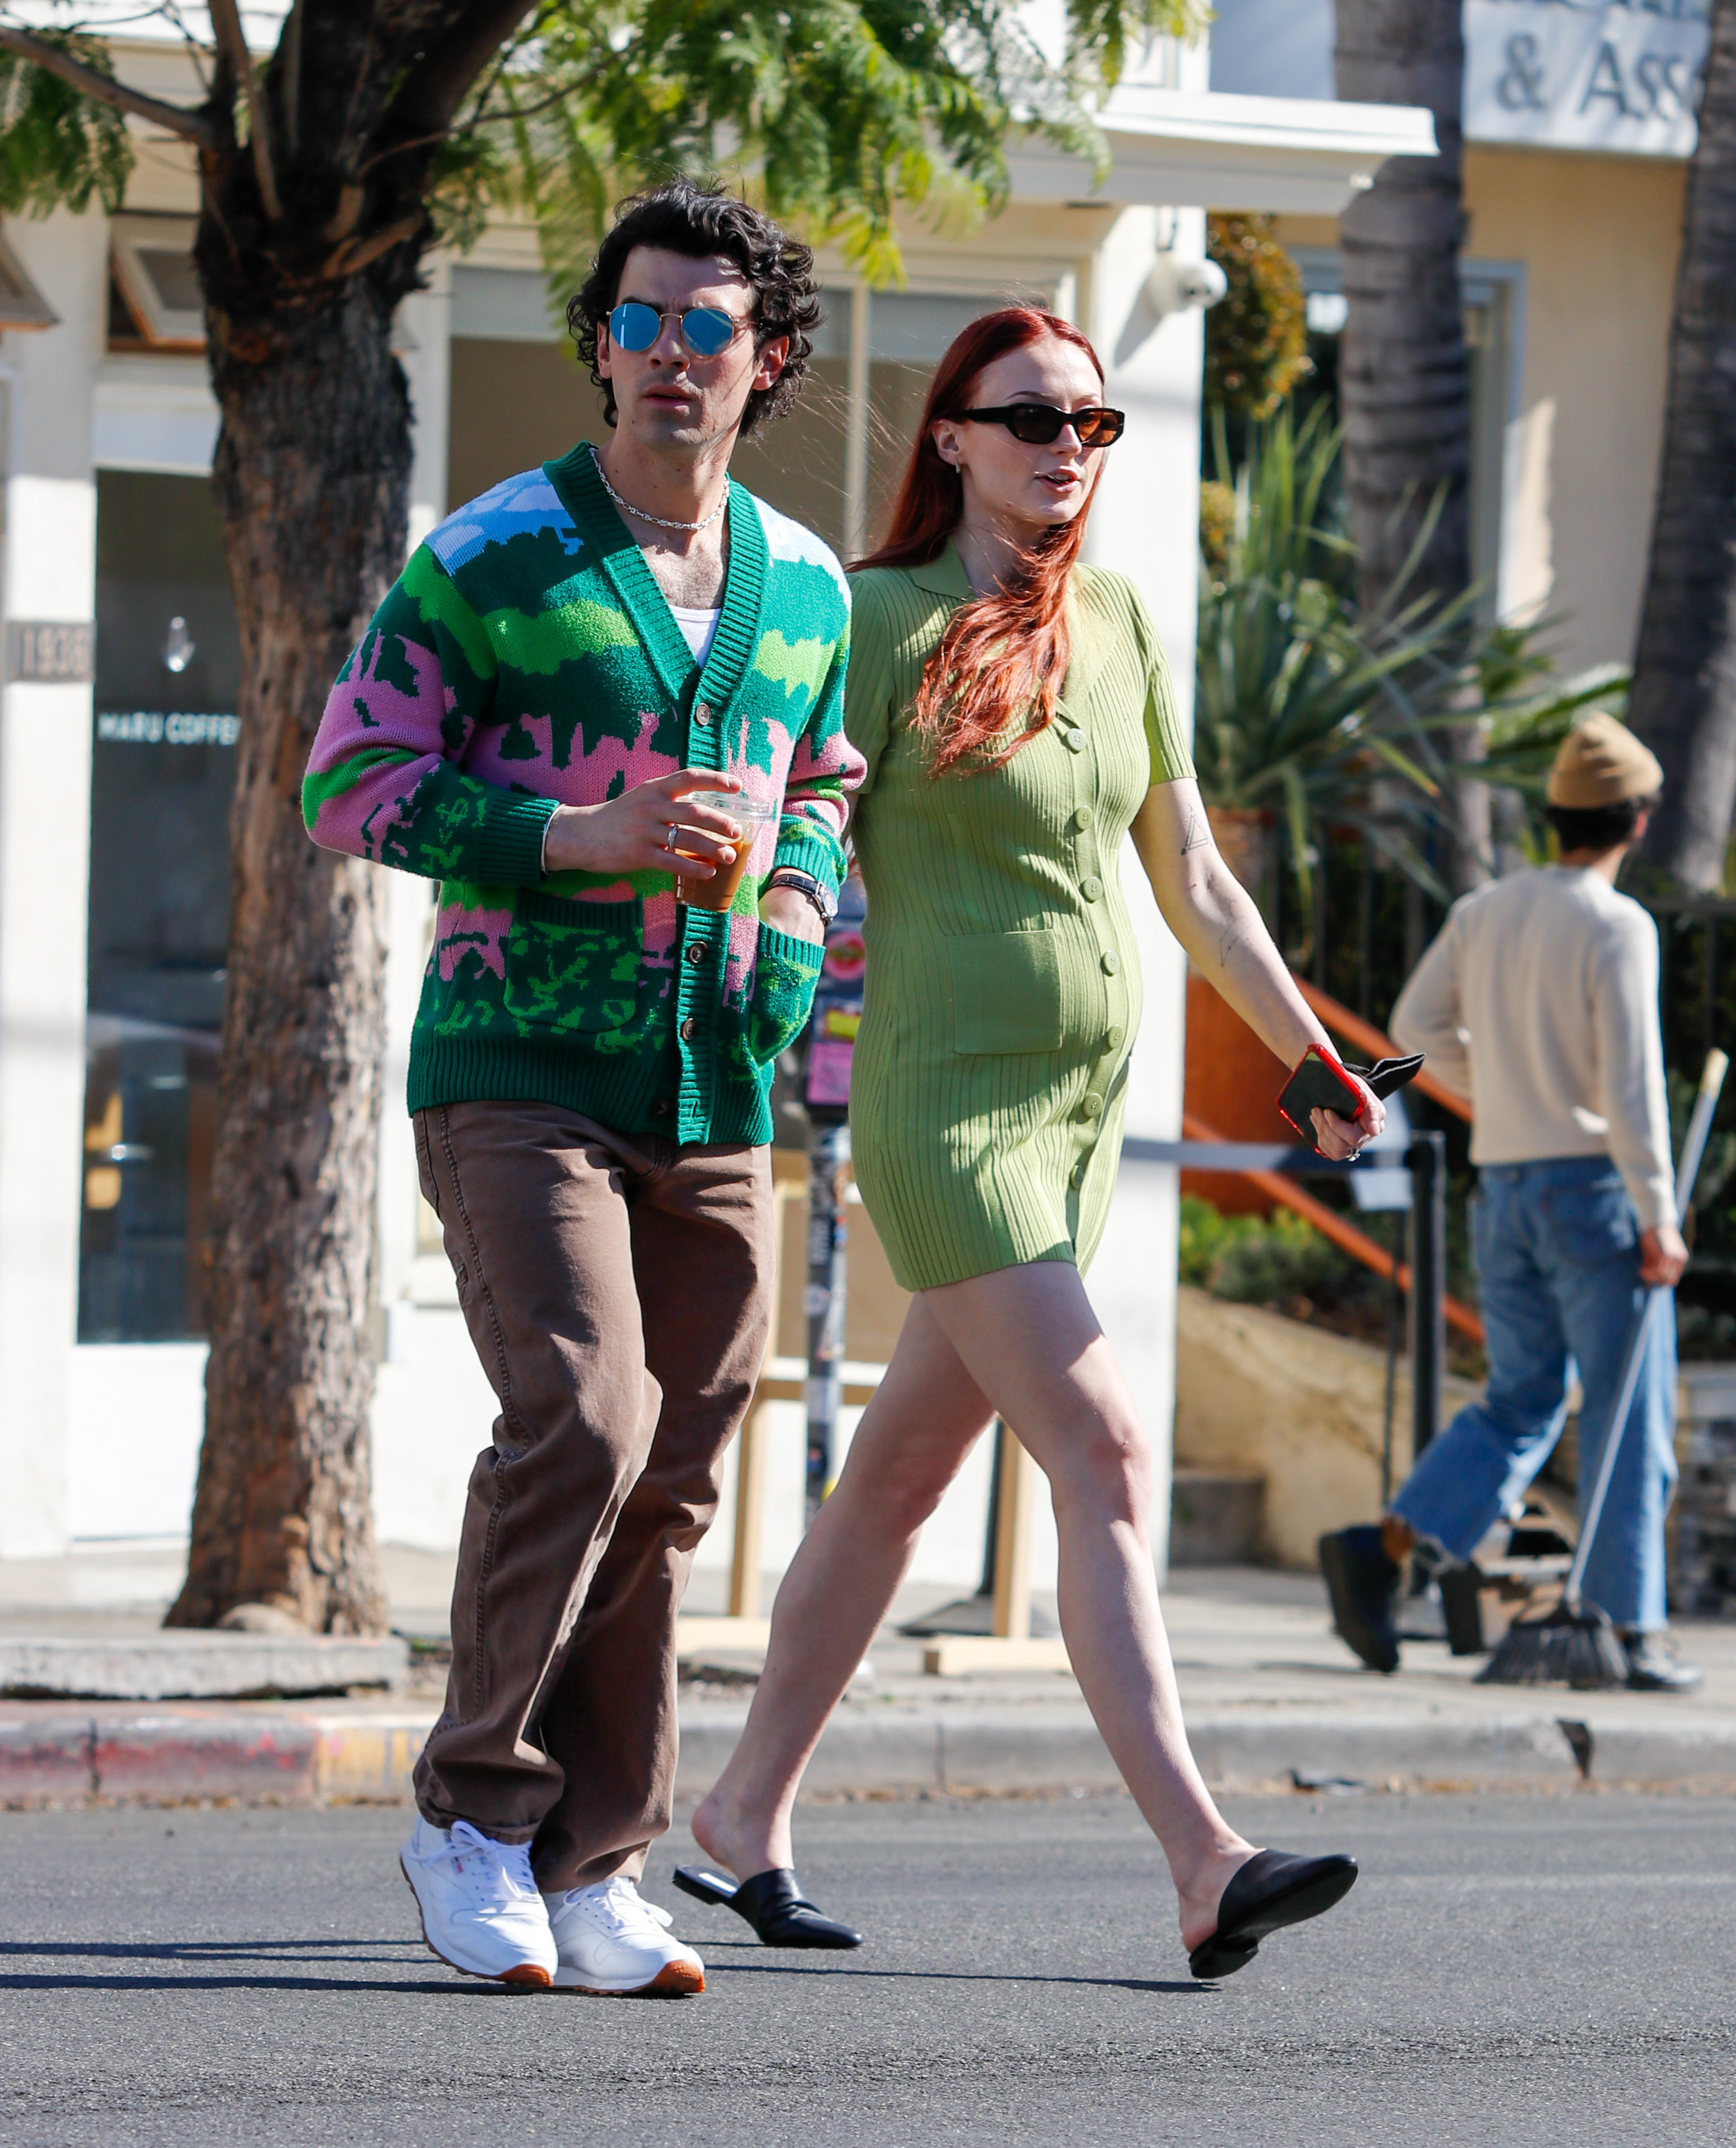 Joe Jonas and Sophie Turner cross the street in Los Angeles on February 16, 2022 | Source: Getty Images